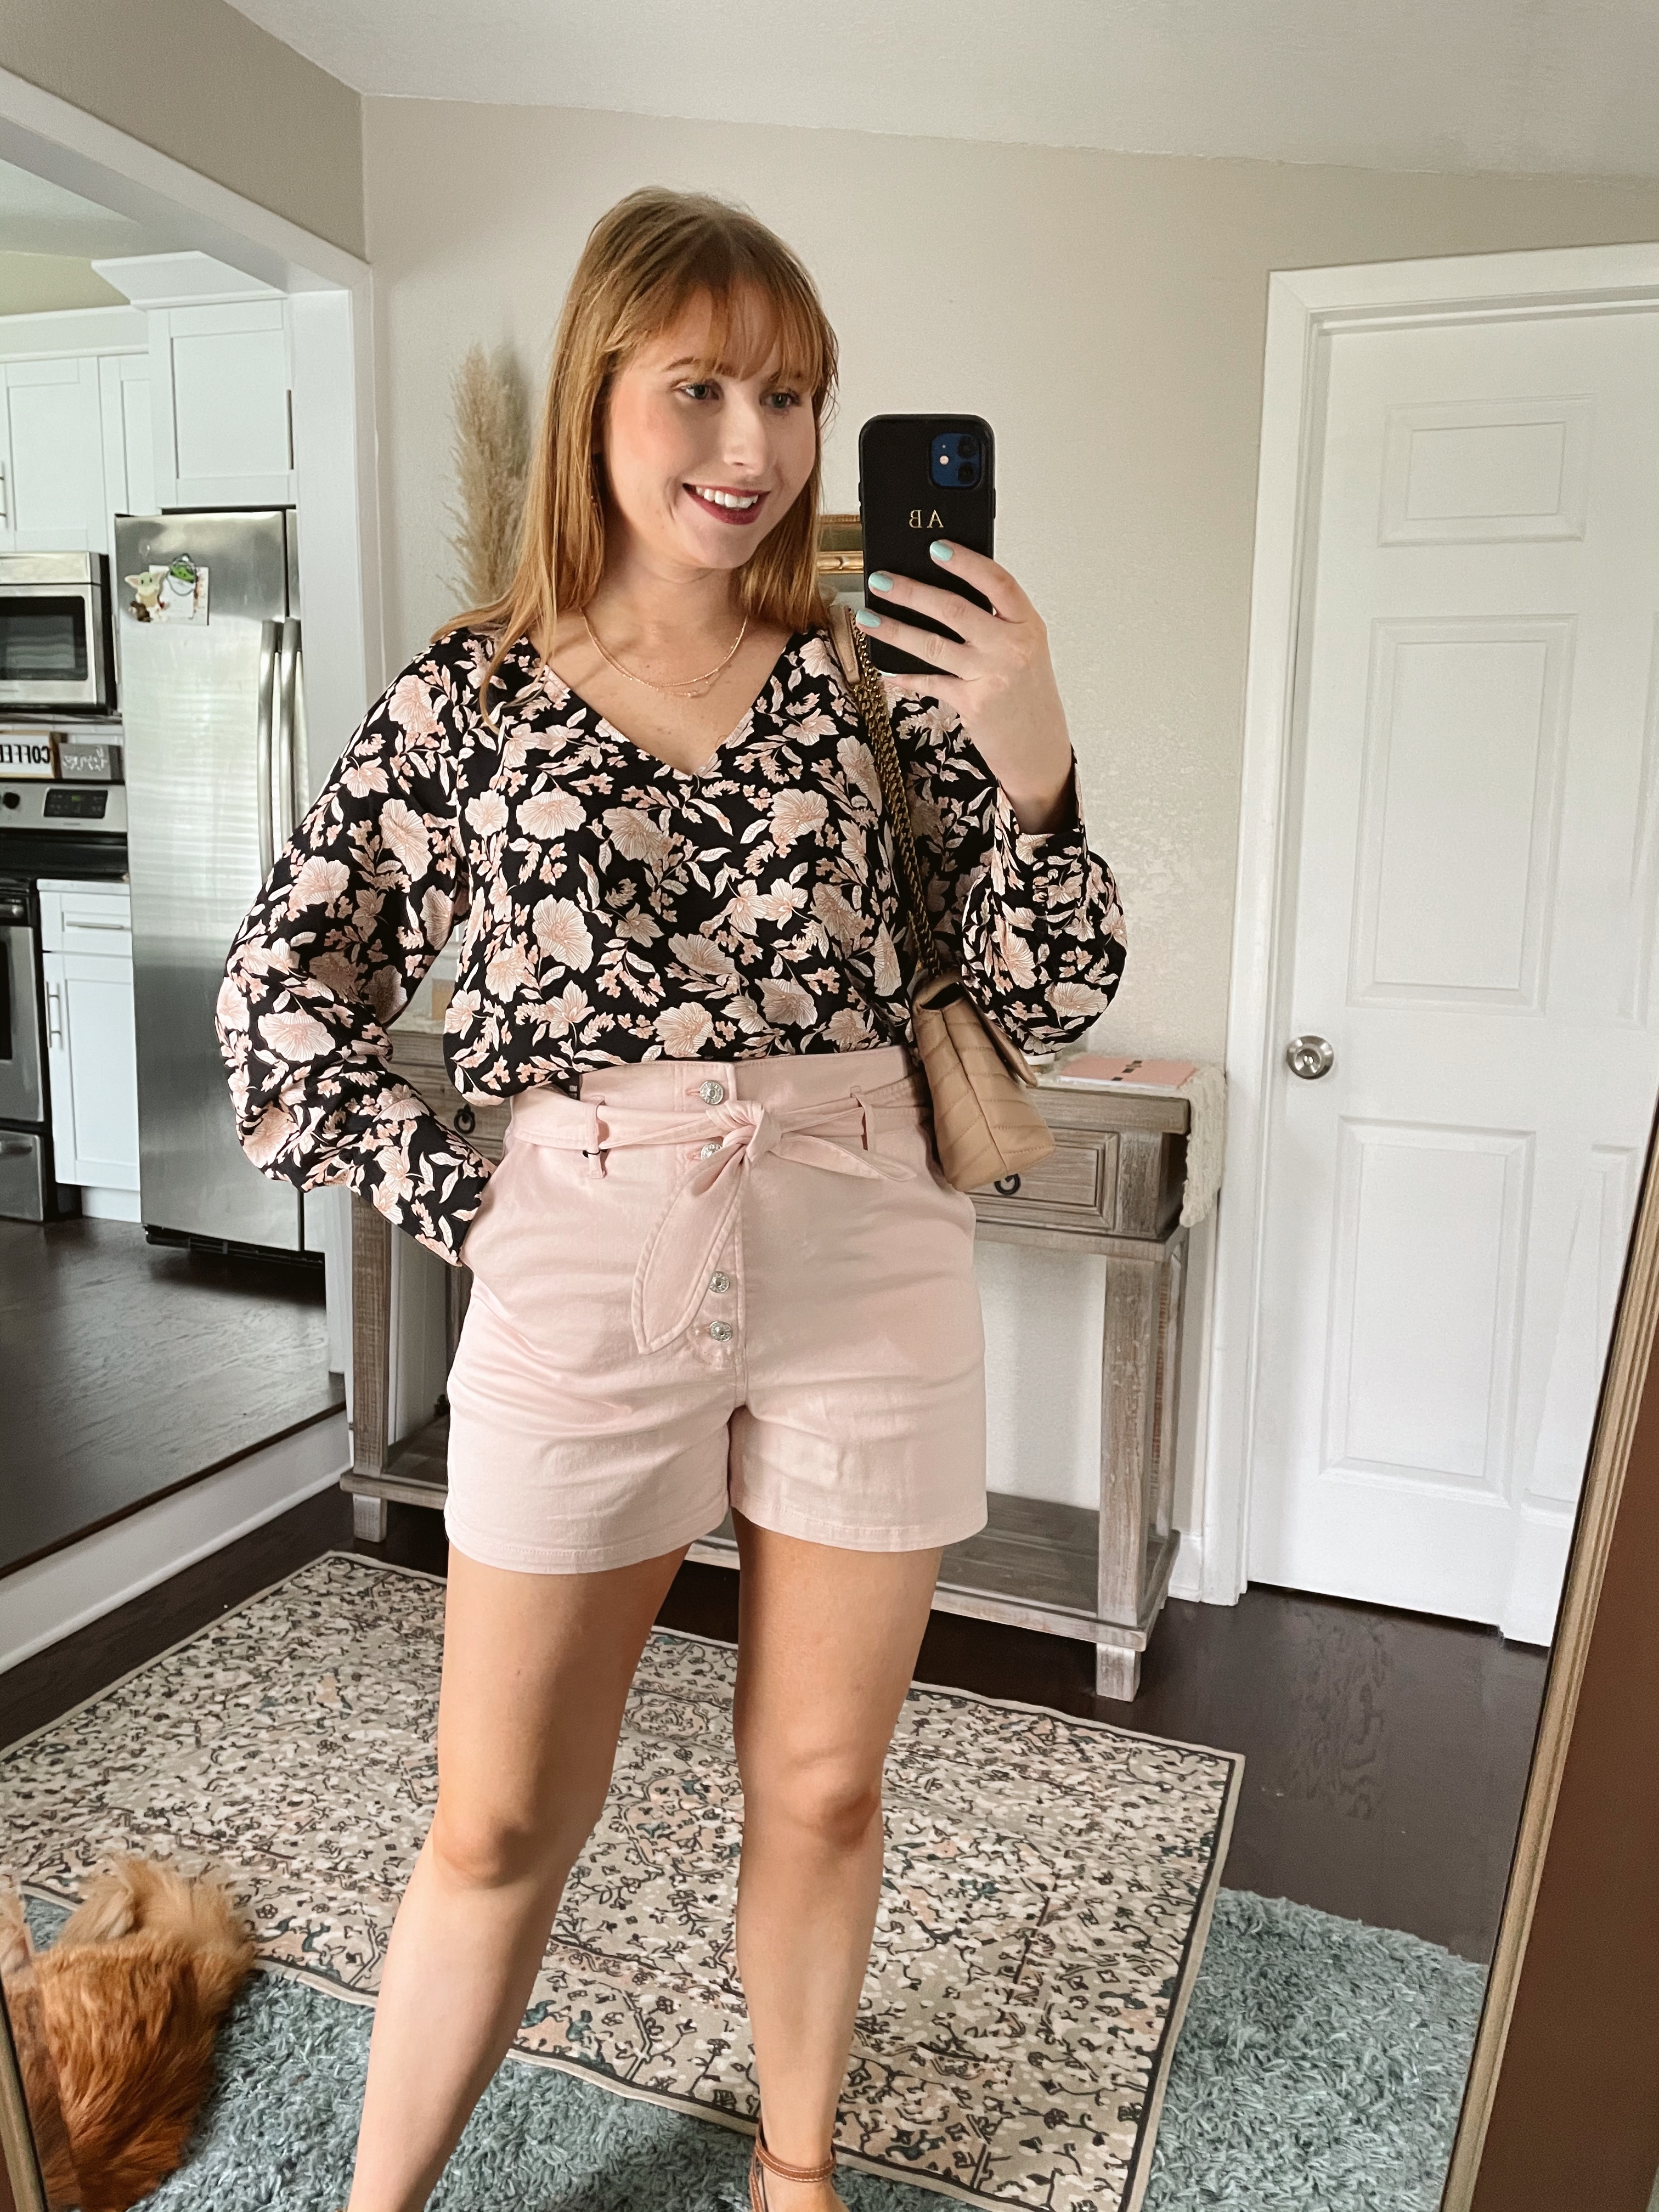 Express Work Outfit Ideas and Spring Looks | Affordable by Amanda shares casual Spring outfit ideas from Express.